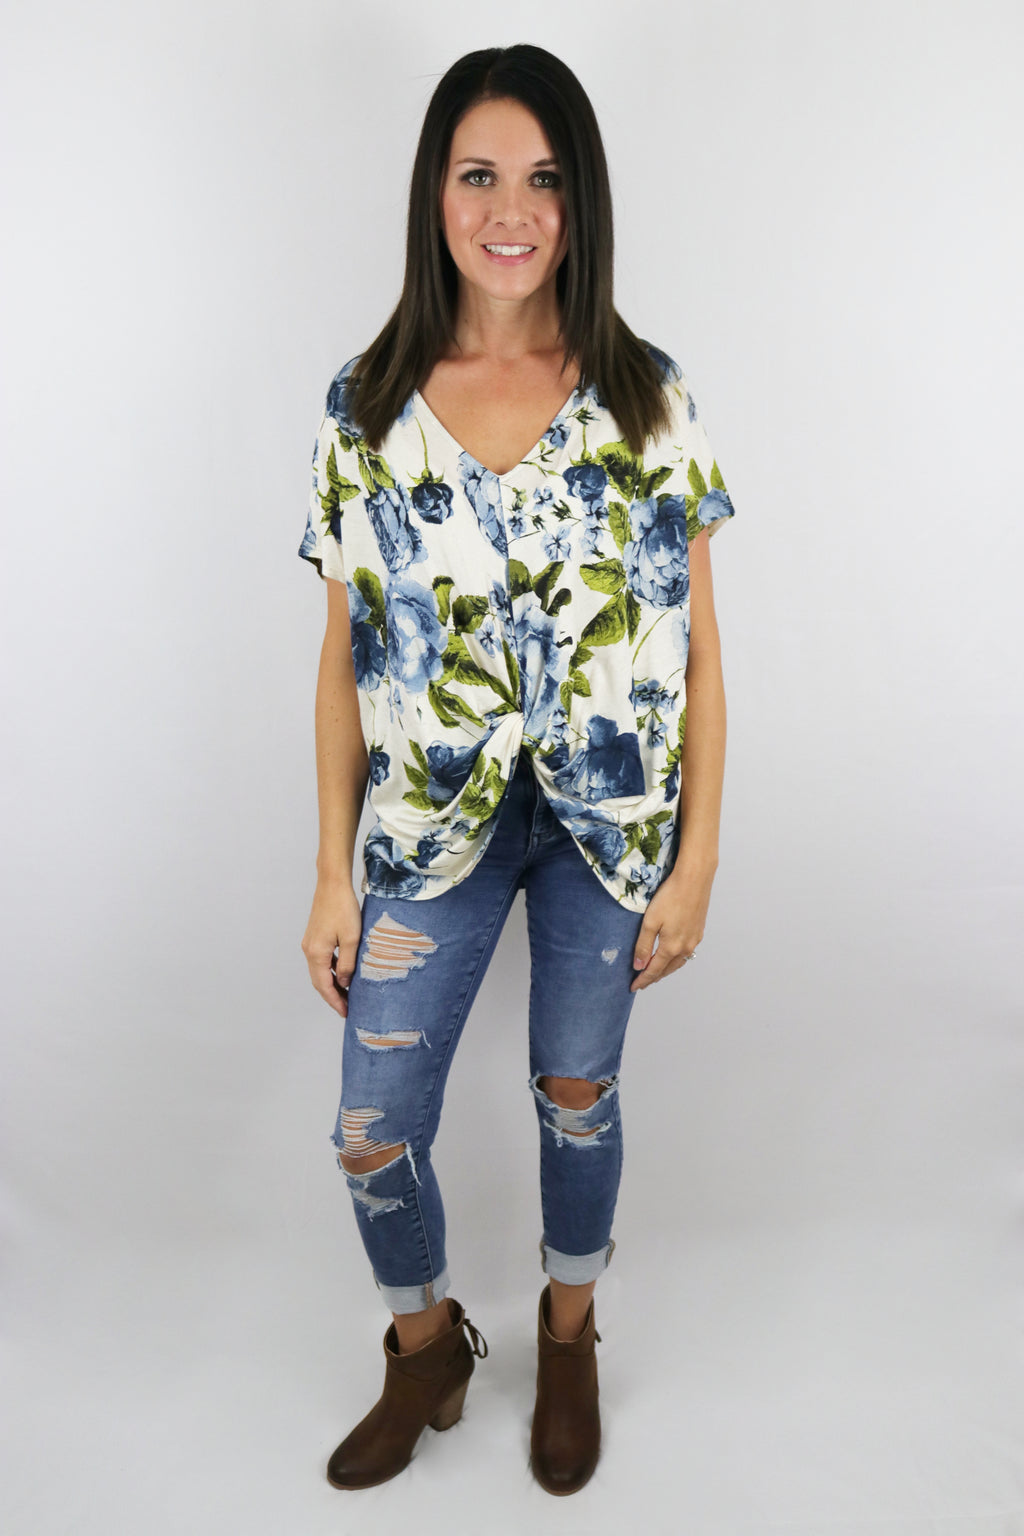 Follow Your Heart Floral Top